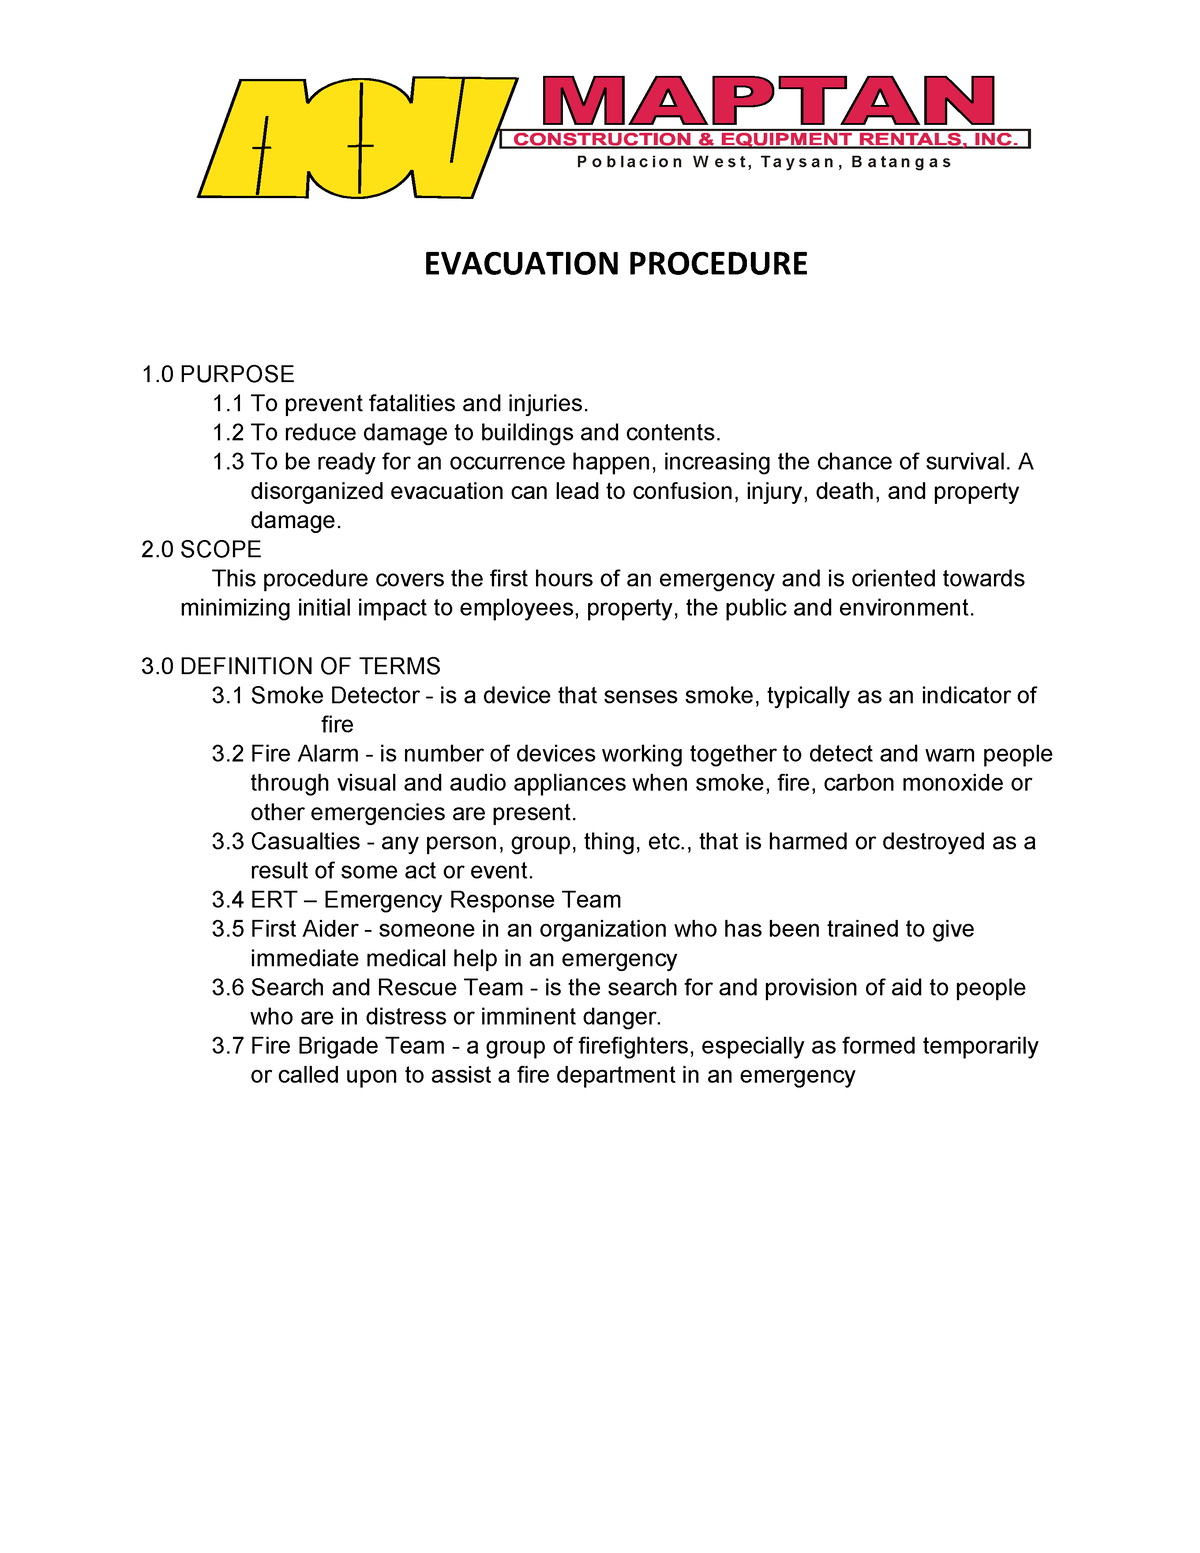 EVAC PLAN - evacuation plan - P o b l a c i o n W e s t , T a y s a n ...